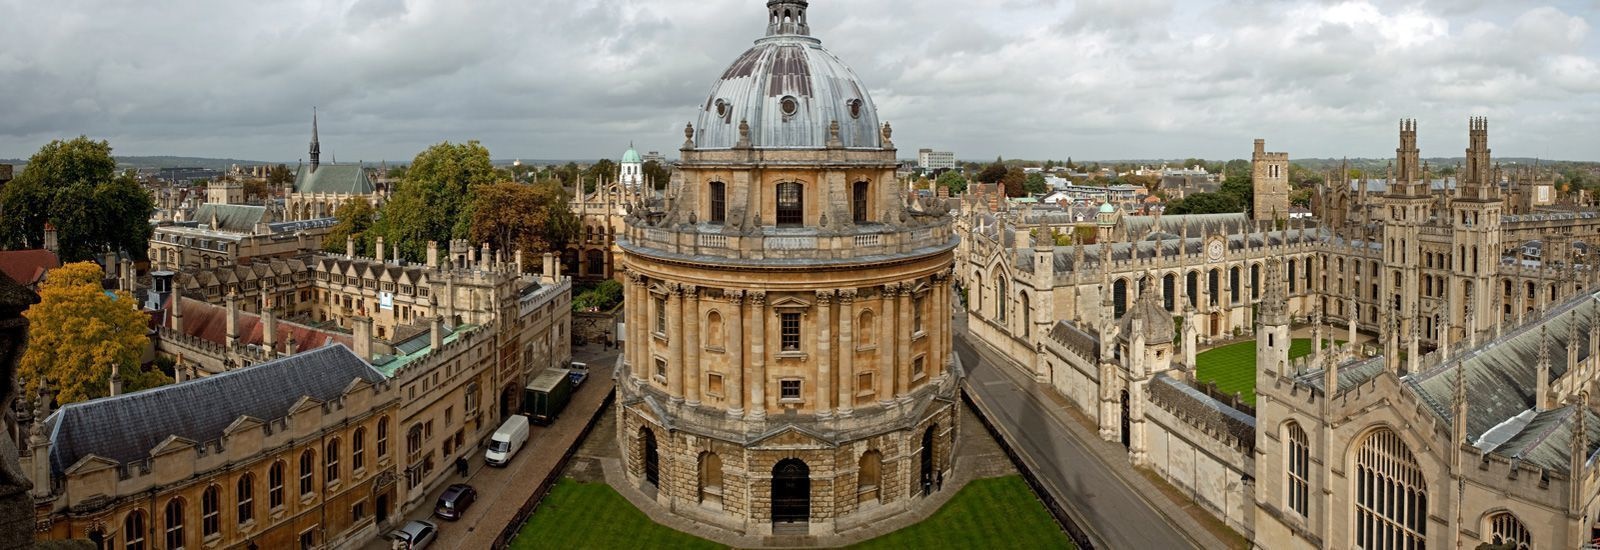 The University of Oxford dates back to 1249 -- teachings in the location had begun earlier at around 1096 -- meaning that the famous institution is older than Aztec civilization, which began with the 1325 founding of Tenochtitlan.